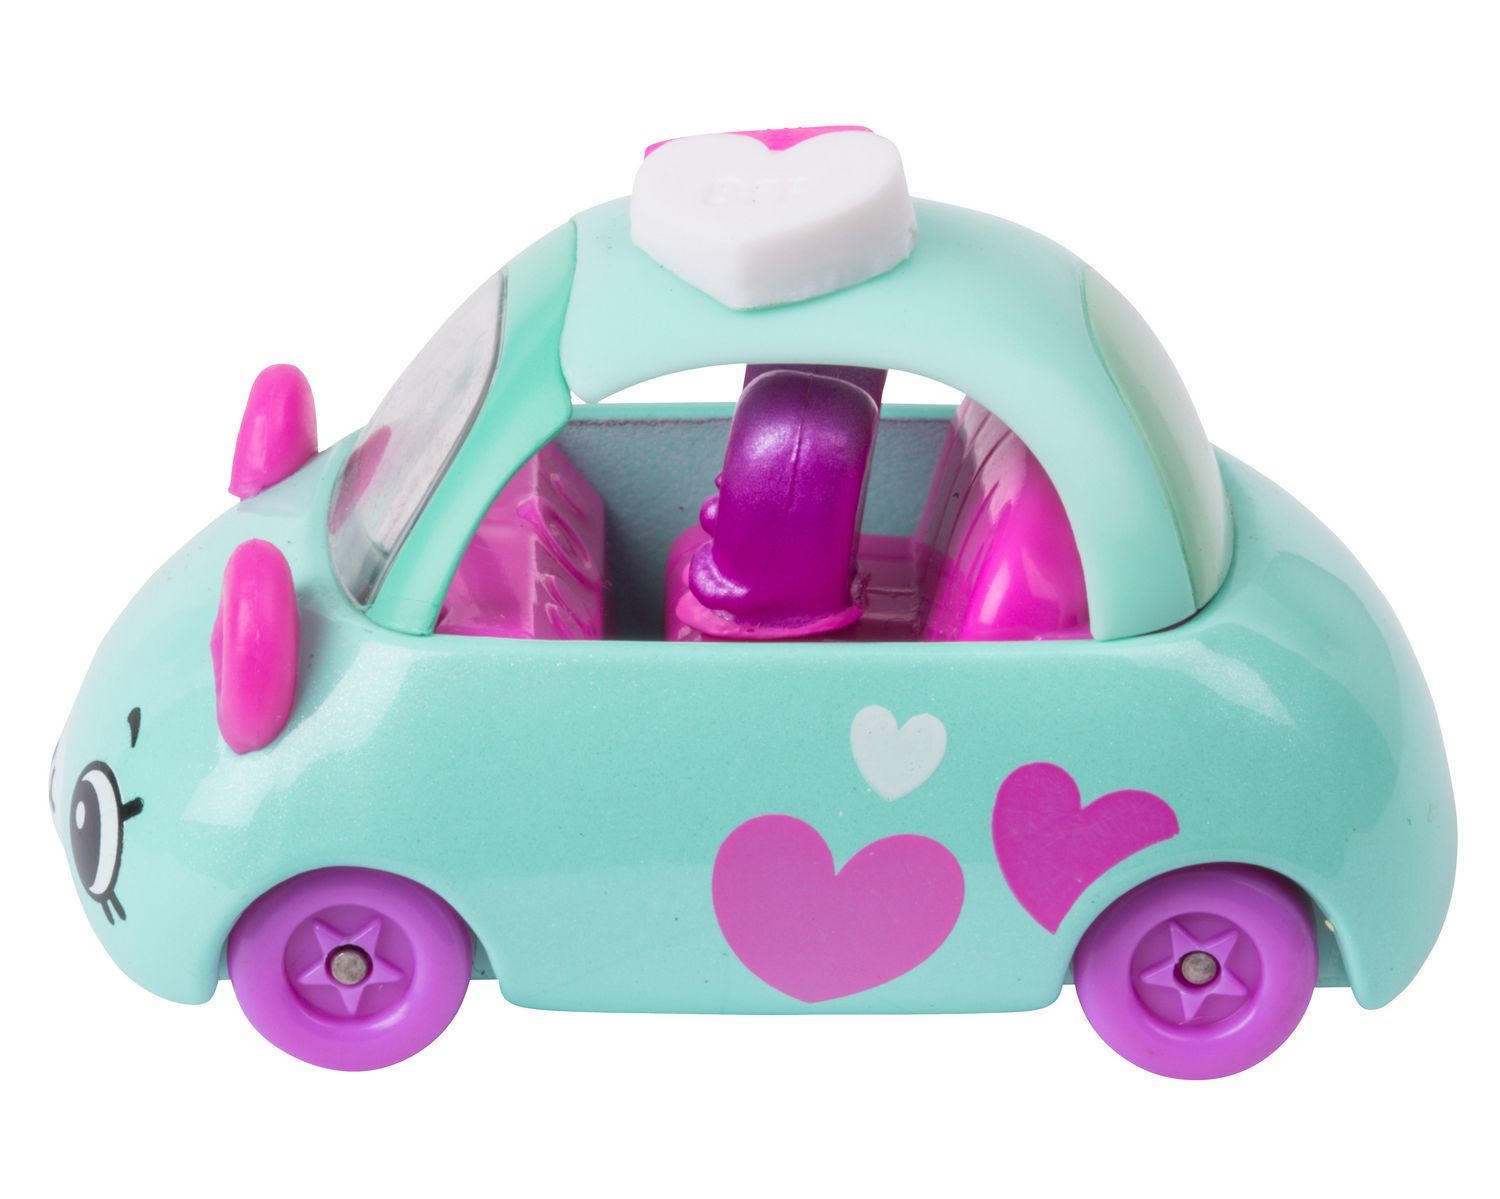 Shopkins Cutie Cars Hearts Blue, Pink and White